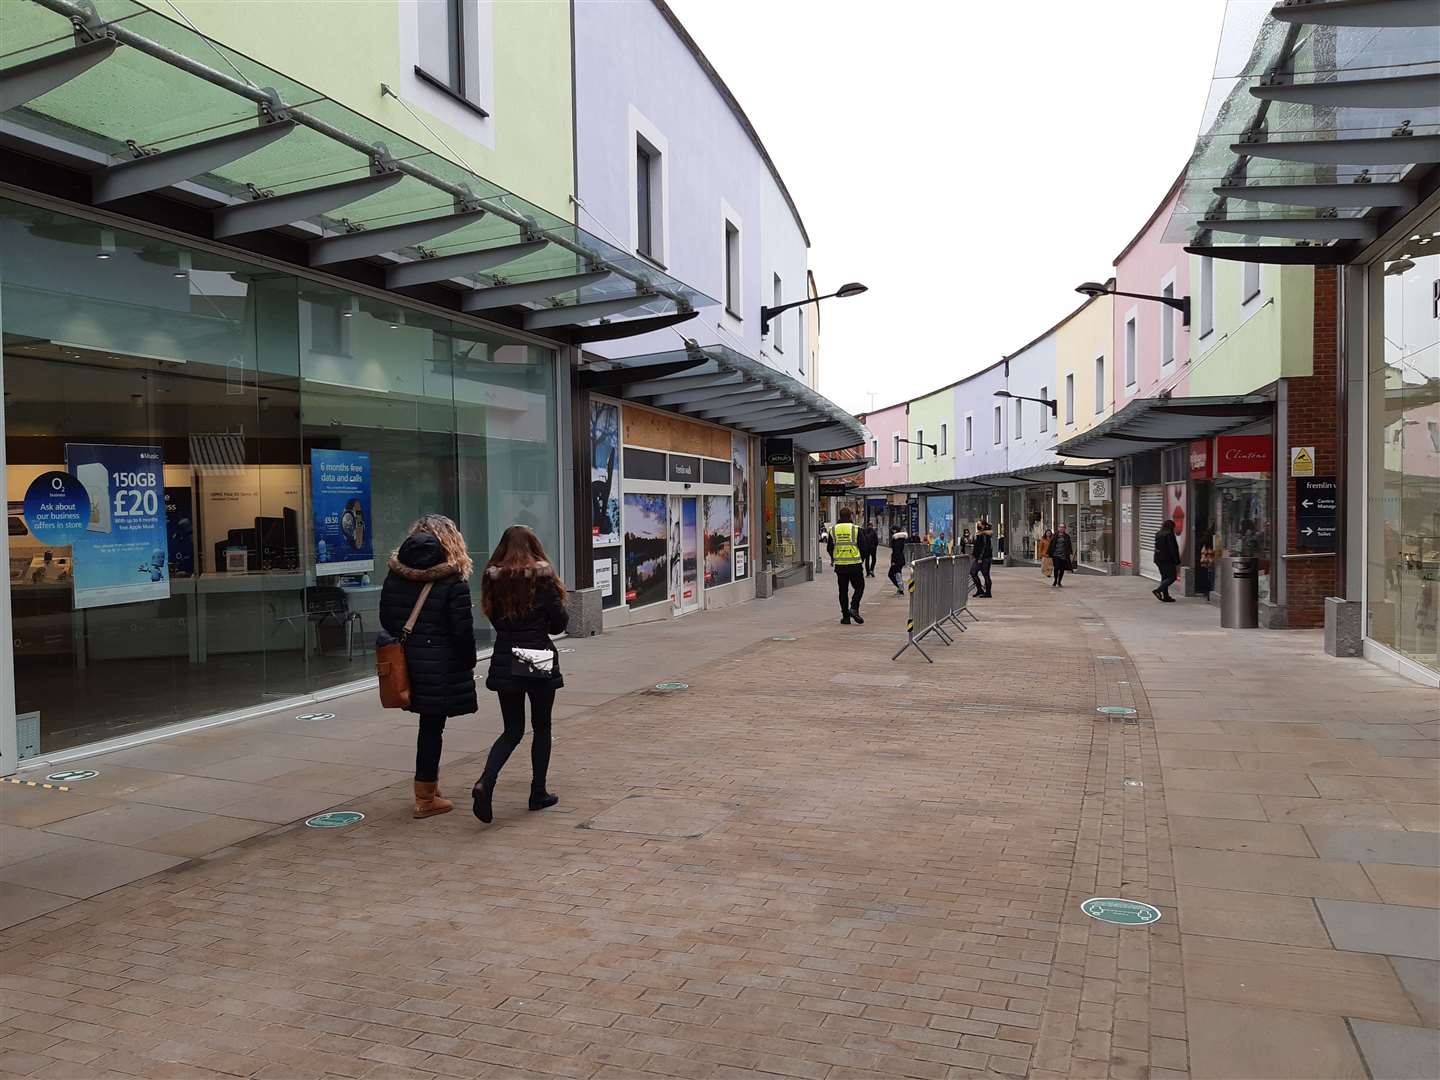 The pensioner's bank card was used to make purchases in the town centre